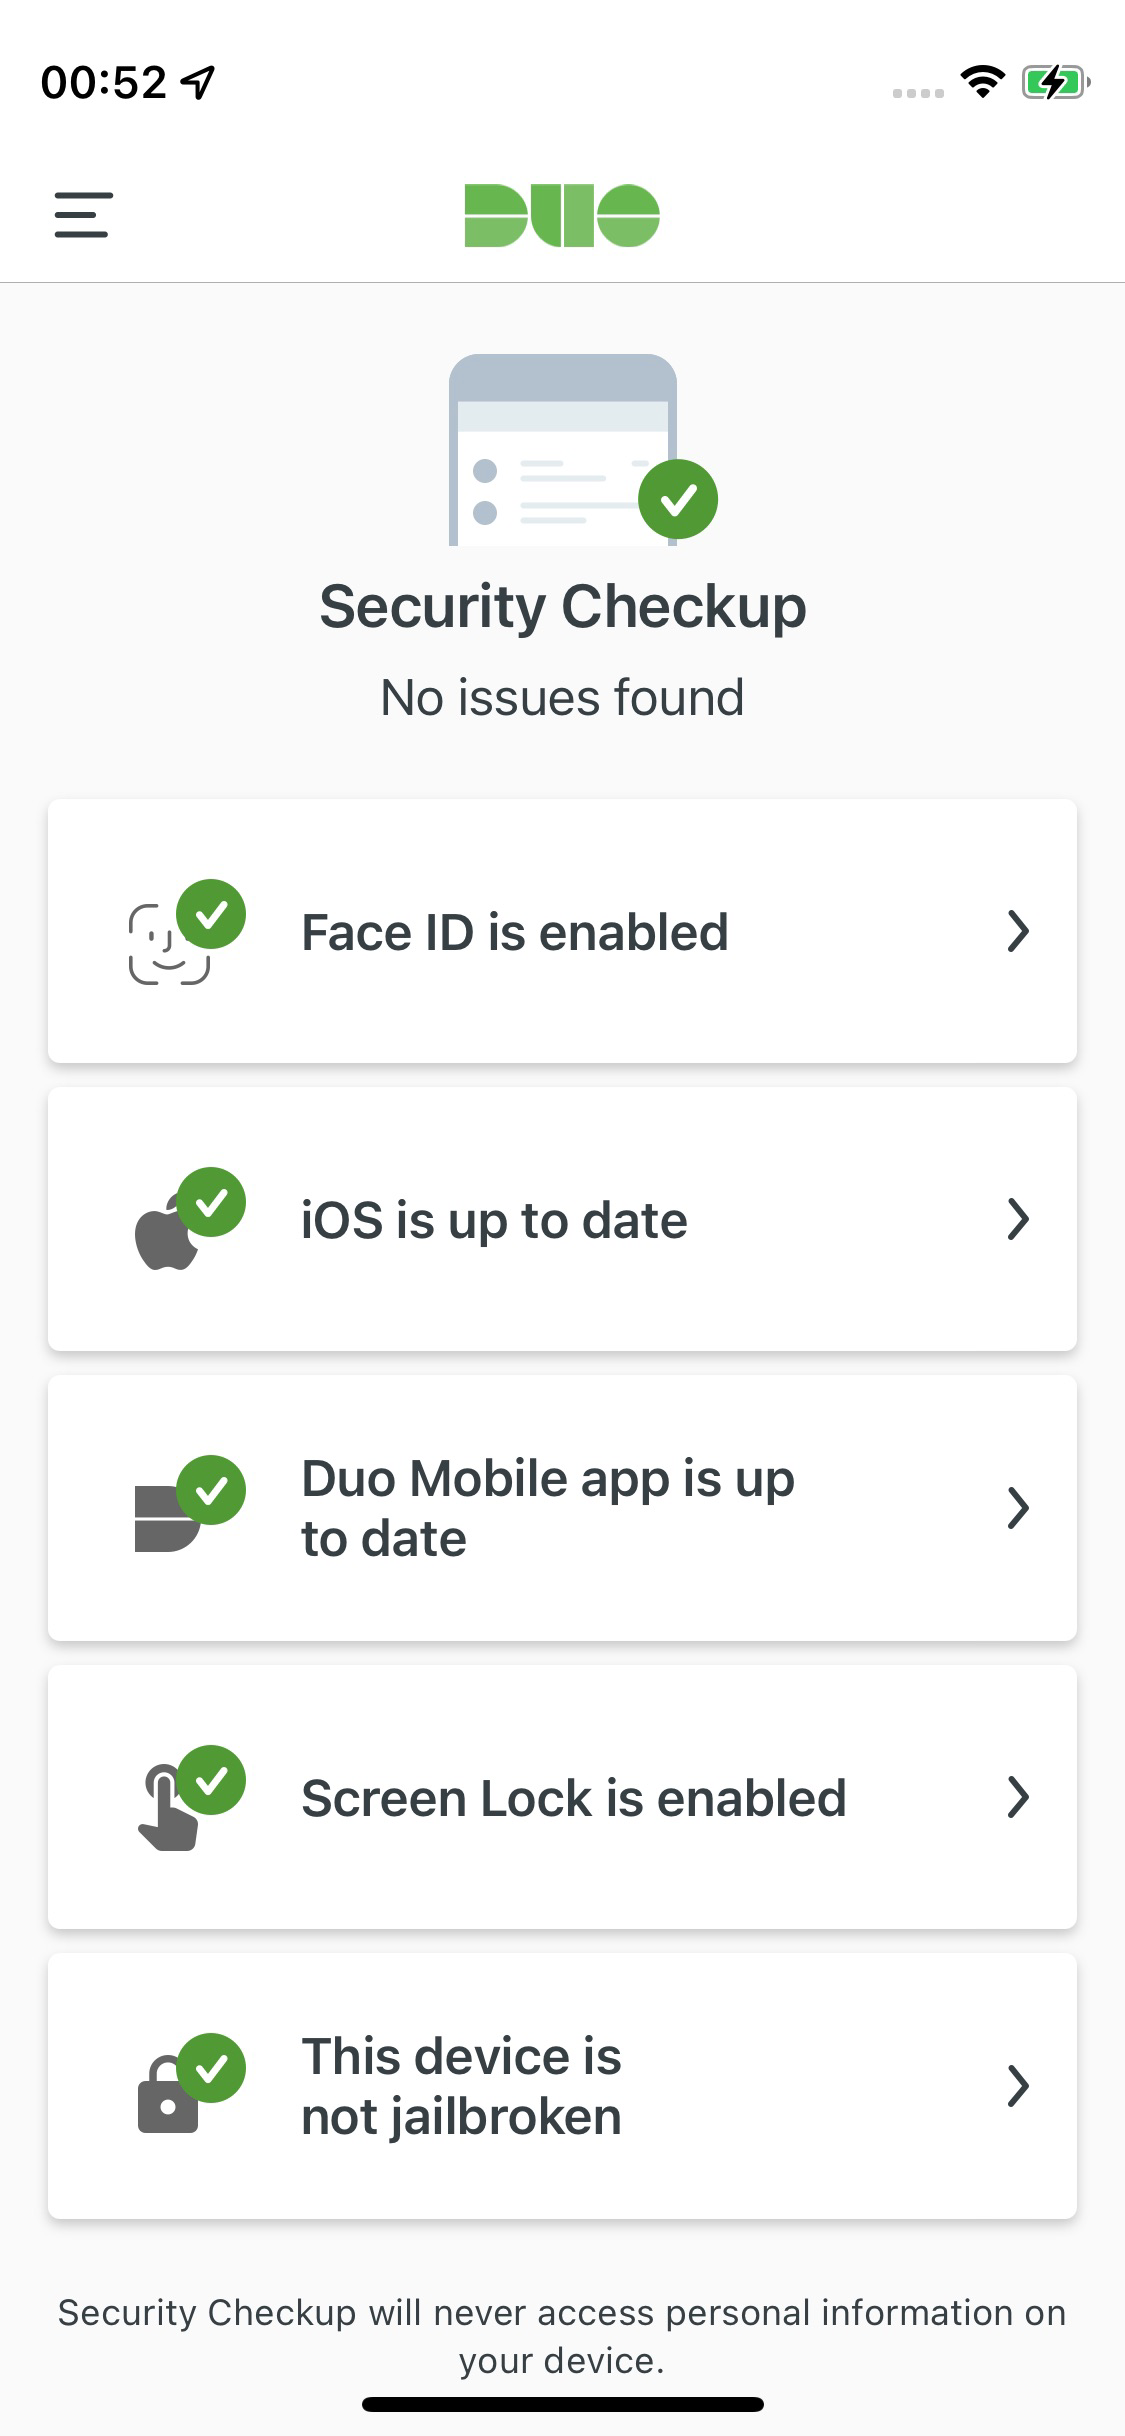 duo mobile app spying